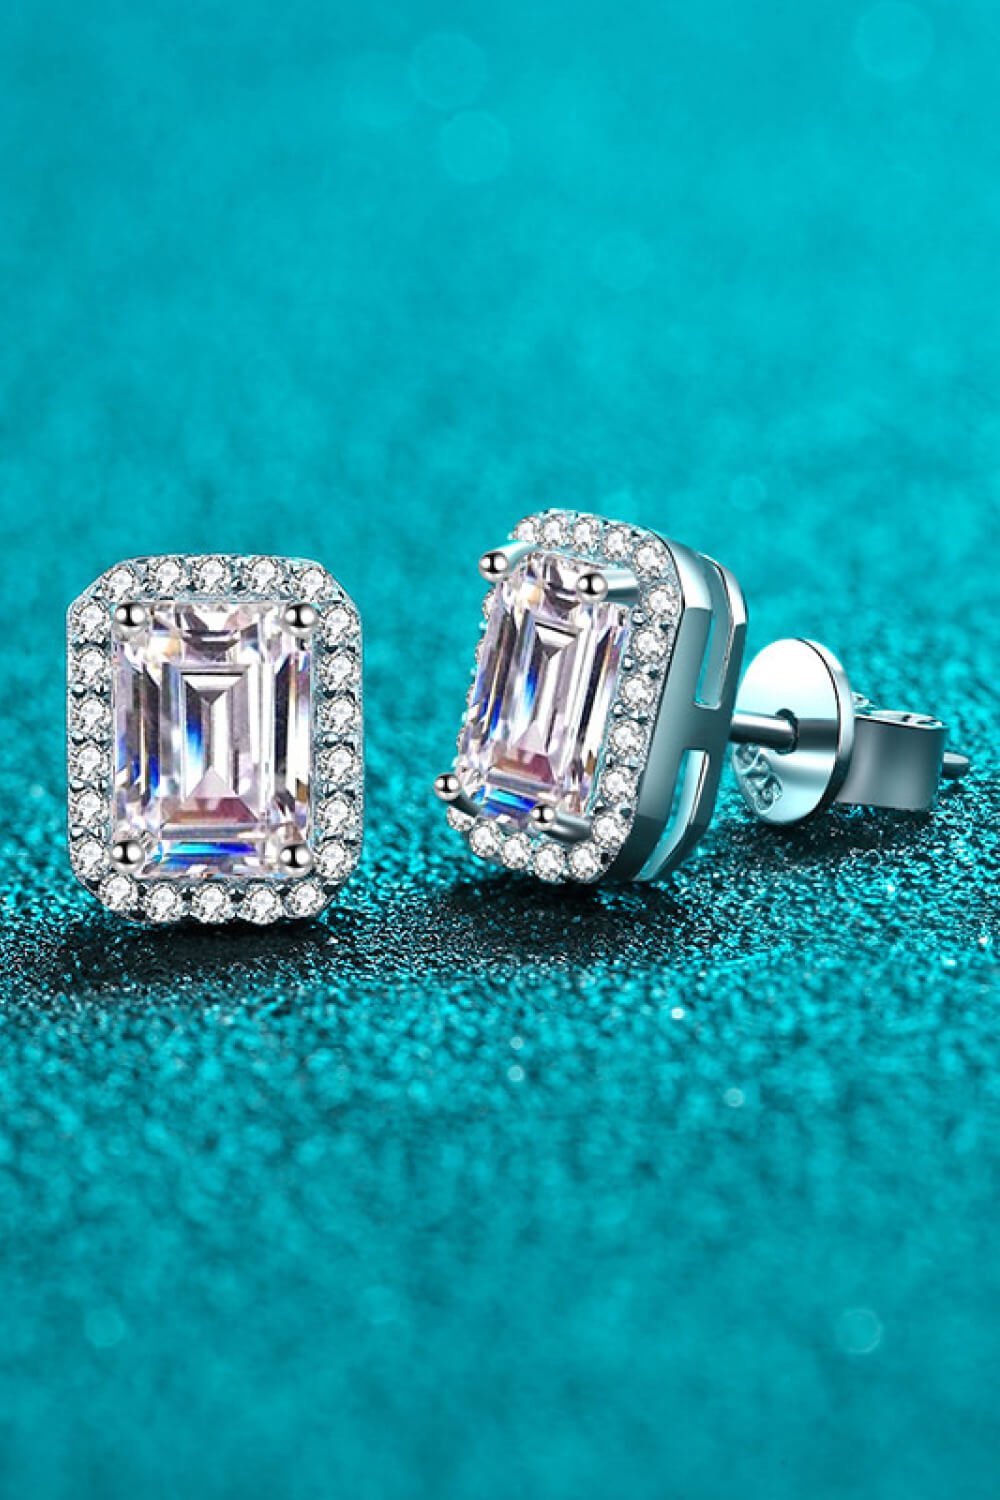 1 Carat Moissanite Rhodium-Plated Square Stud Earrings - Uylee's Boutique